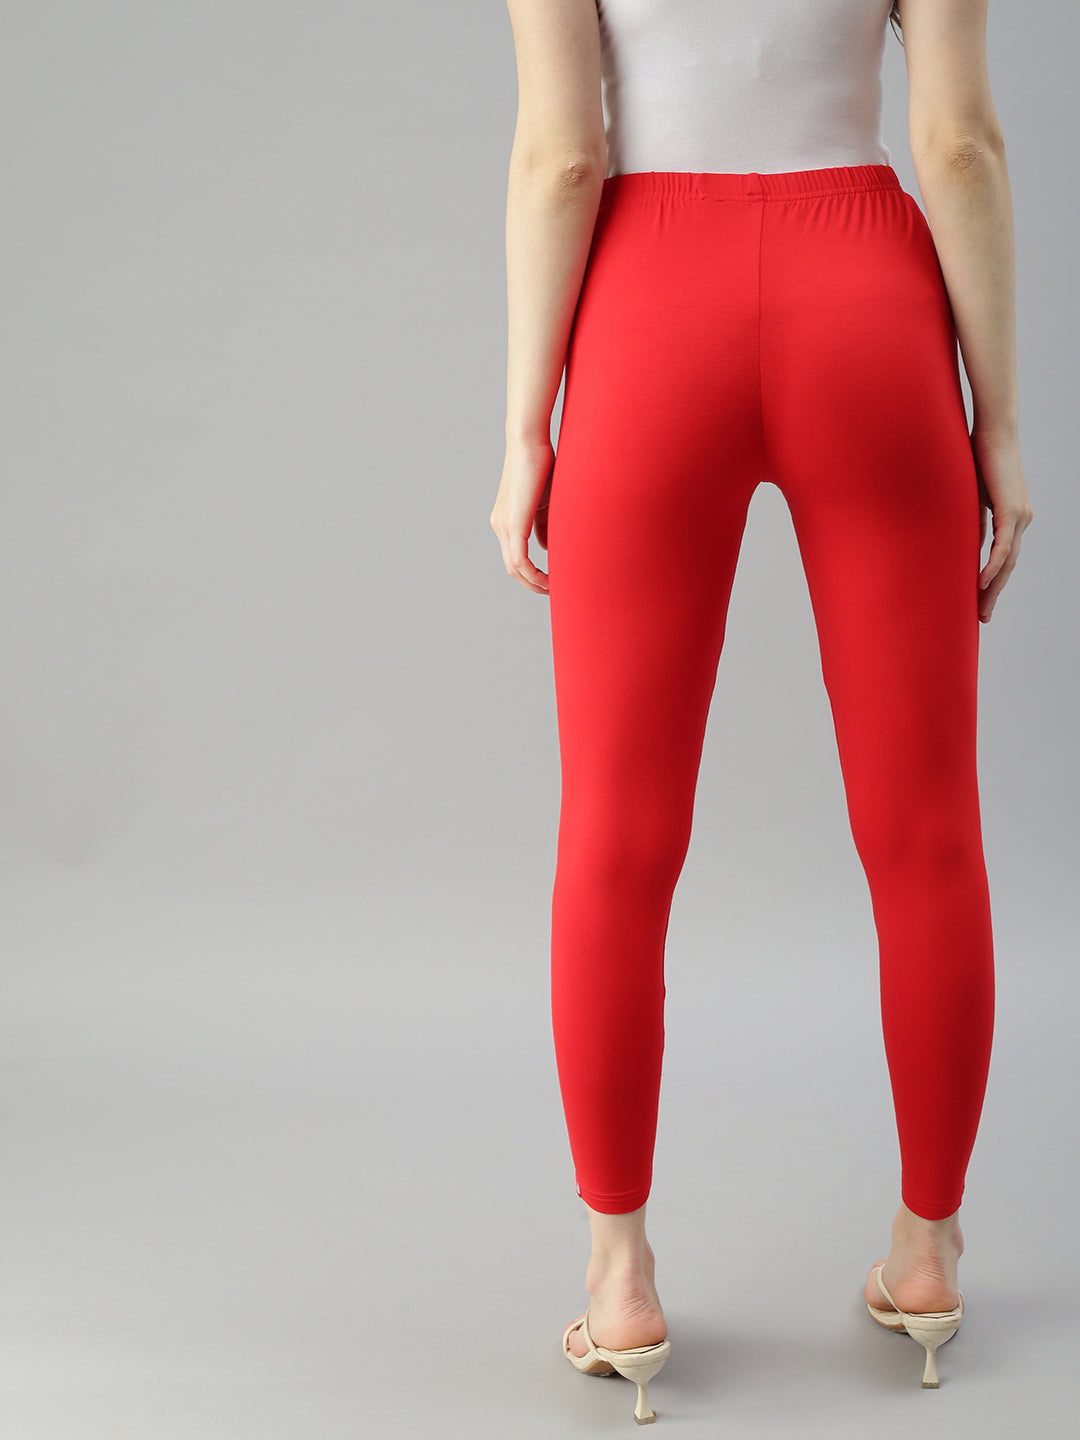 Prisma L Red Girls Legging - Get Best Price from Manufacturers & Suppliers  in India